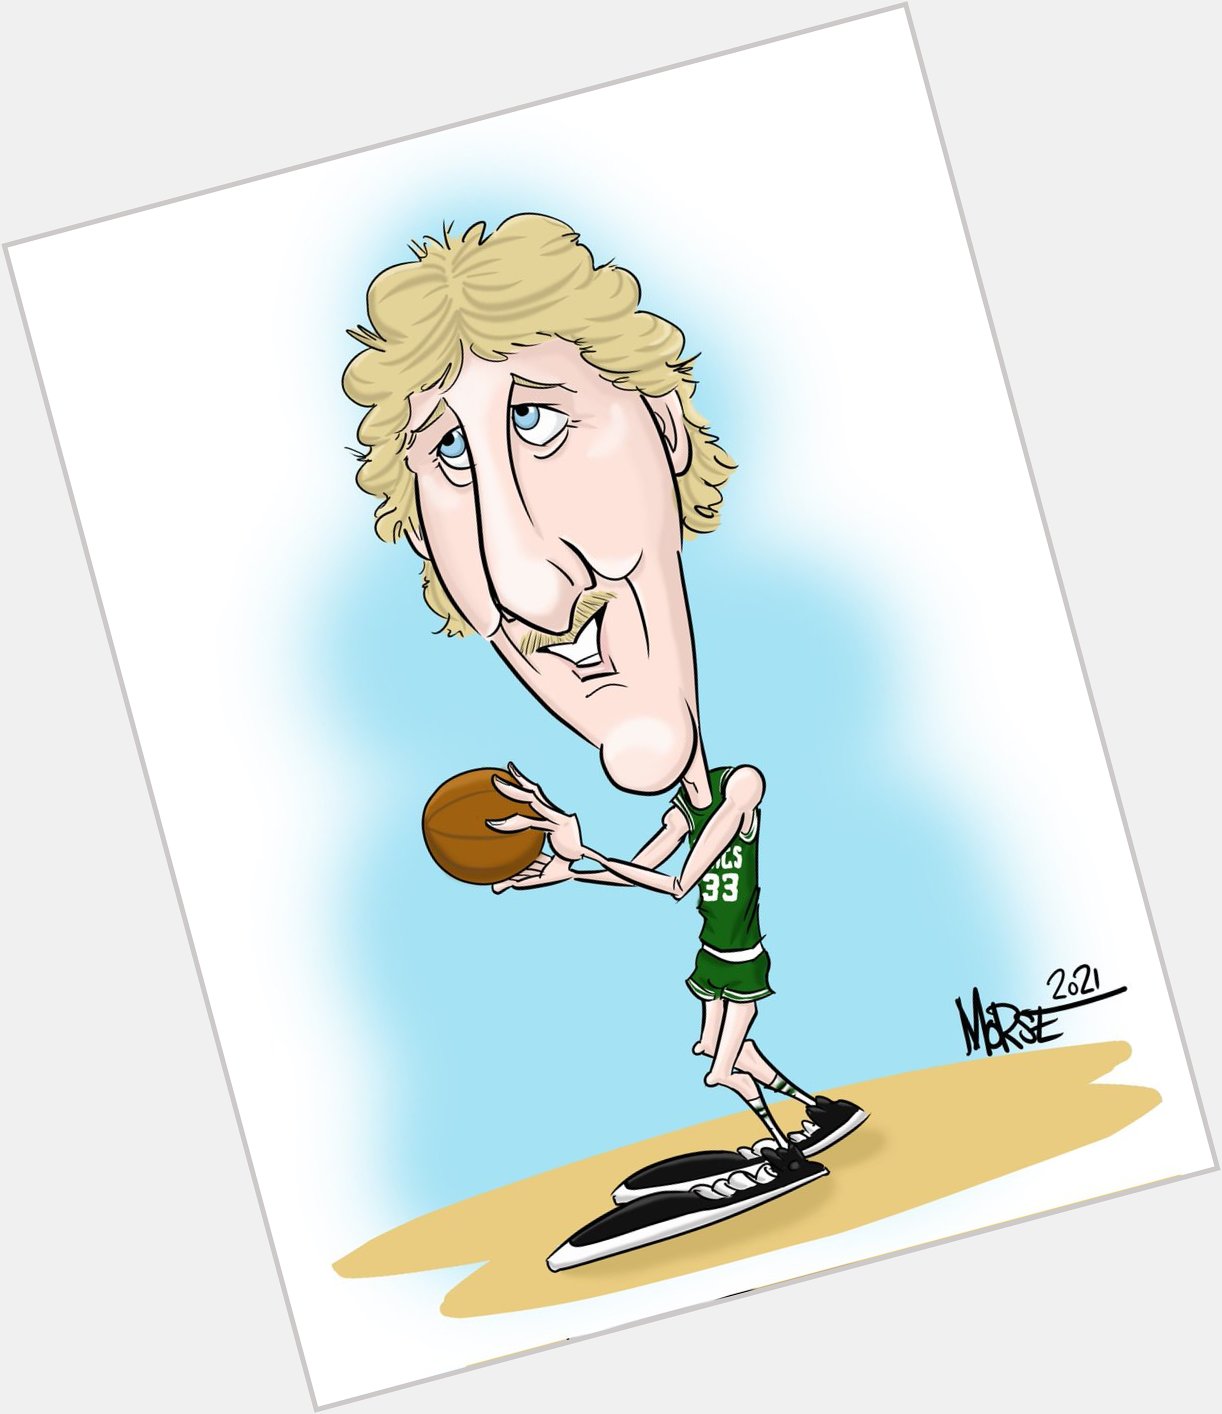 Happy Birthday to Larry Bird! A caricature is a slam dunk holiday gift, so message me! 